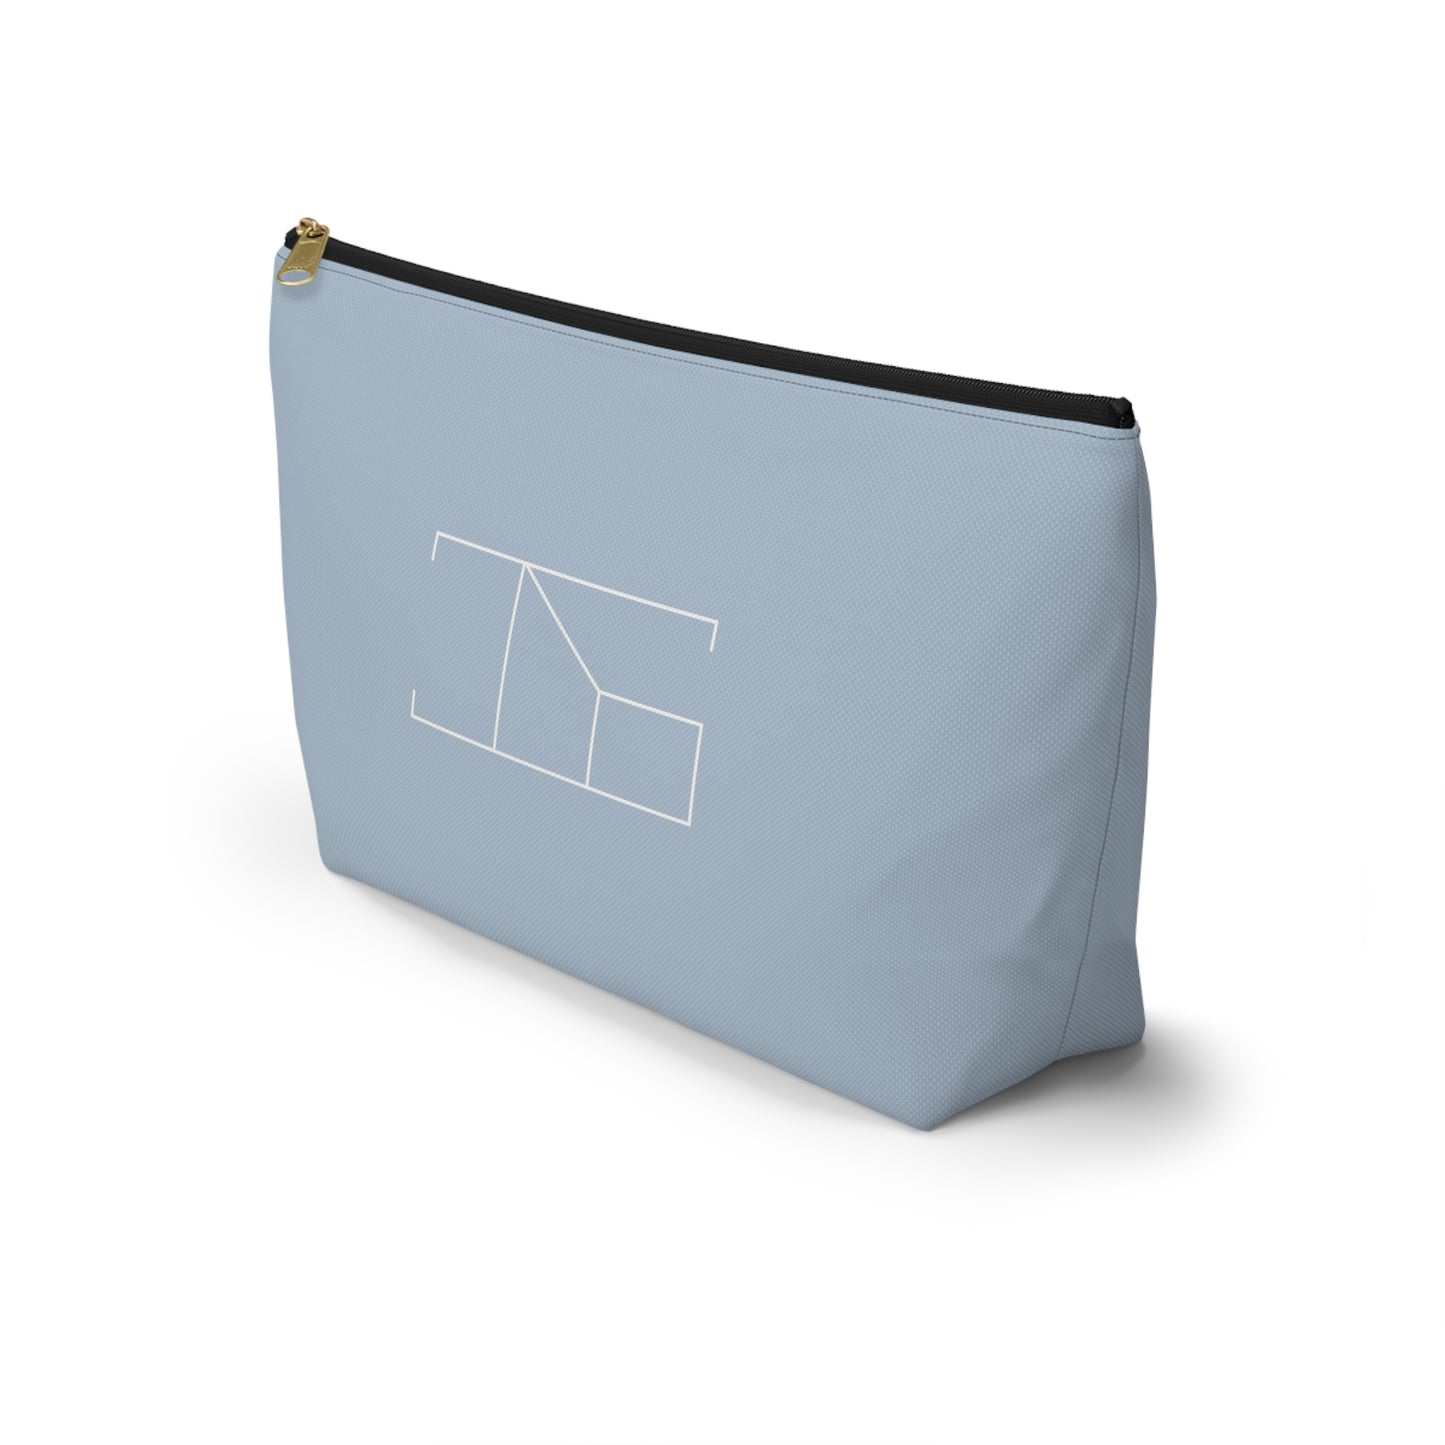 Toiletry Pouch - Pearl Mist